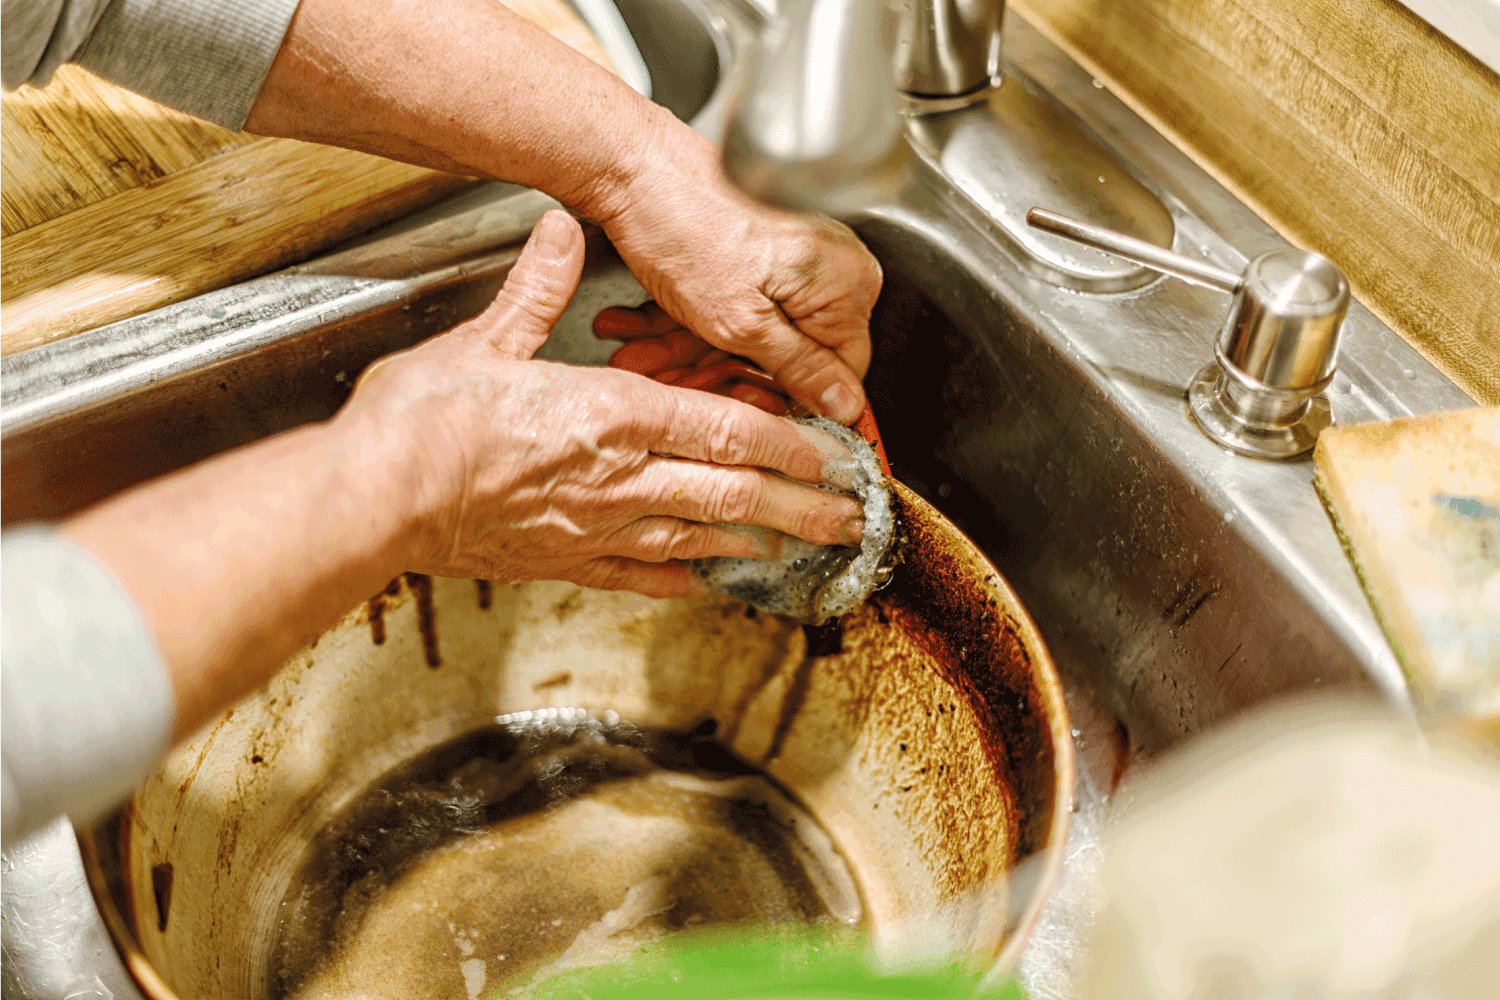 Hand washing a grimy, oily, sloppy Dutch oven cooking pan. A scouring pad is required to remove the burnt, baked-on Italian tomato sauce food residue